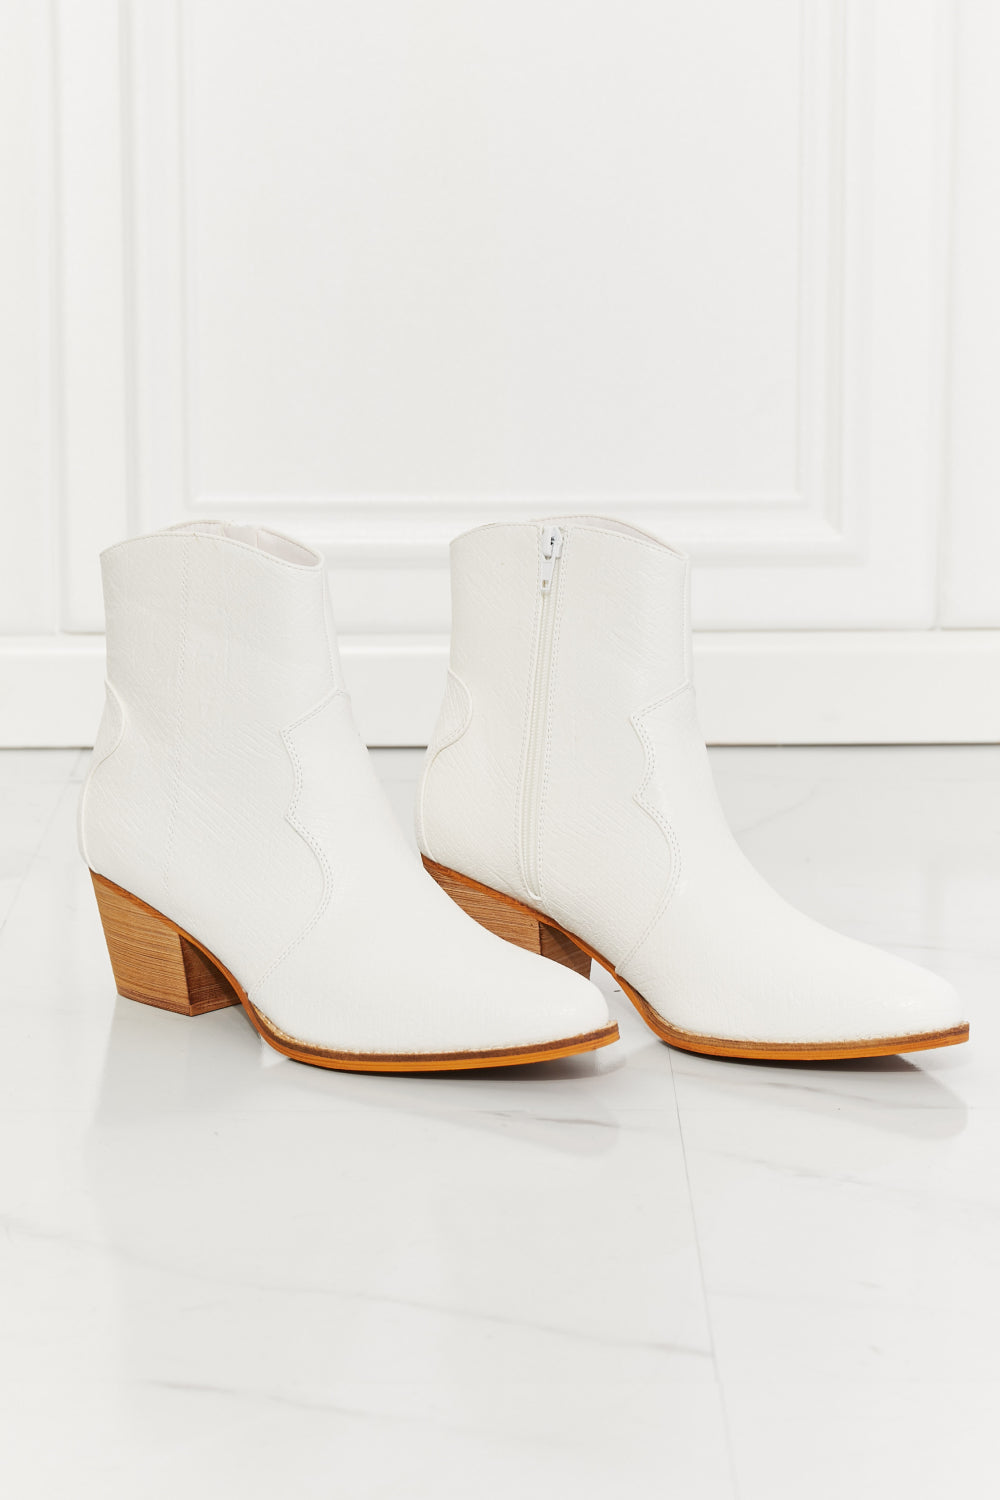 MMShoes Watertower Town Faux Leather Western Ankle Boots in White - nailedmoms